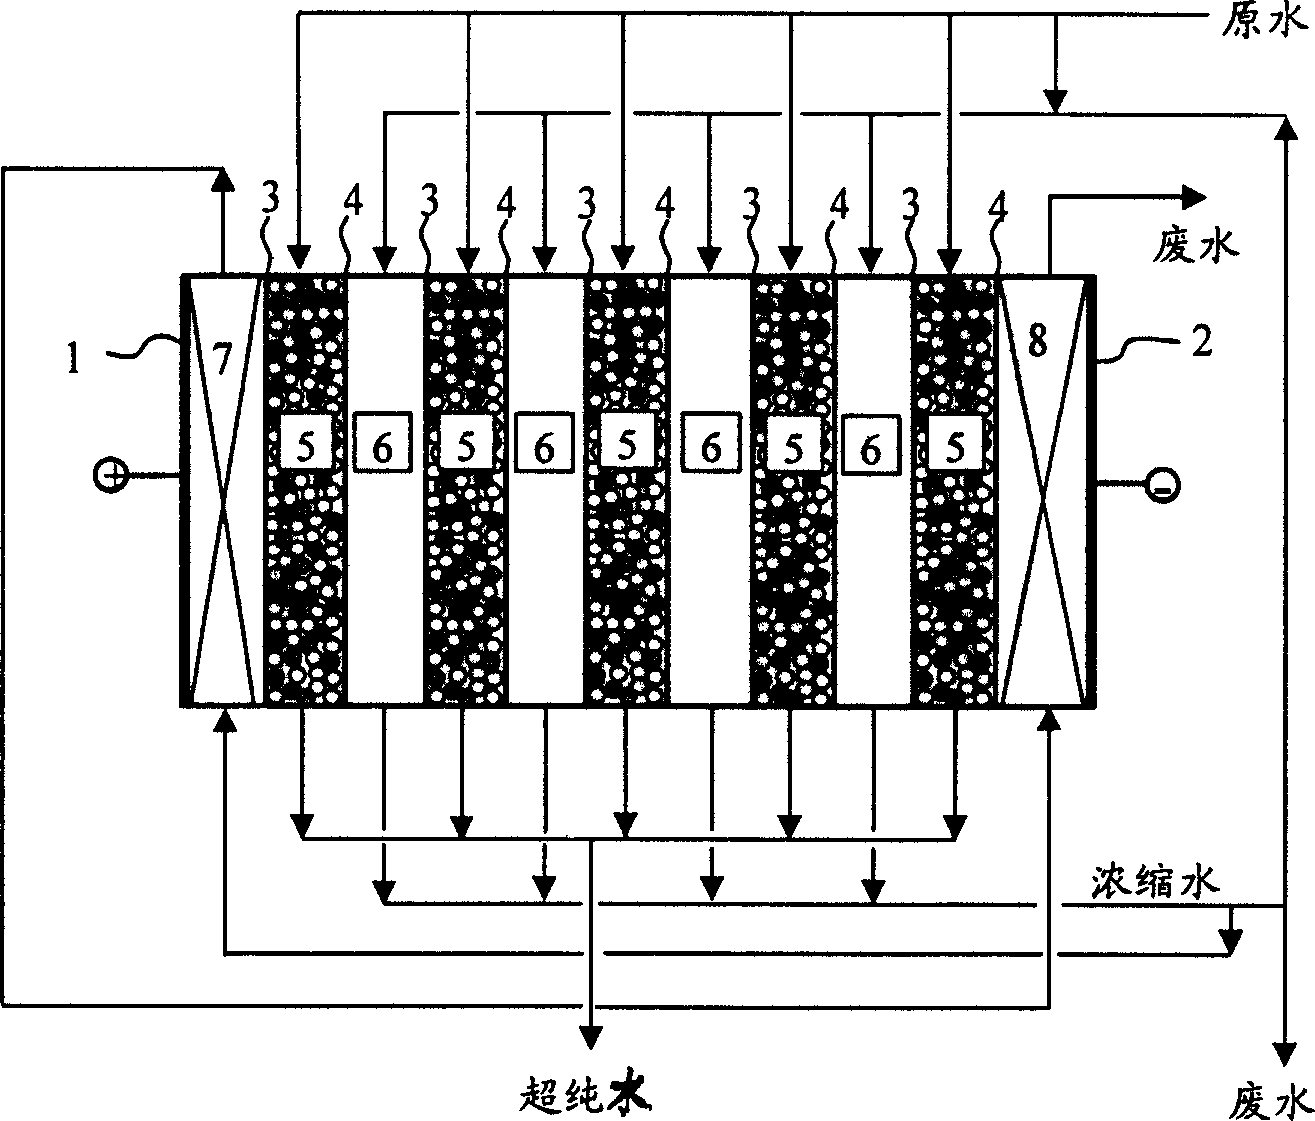 Electric deionisation method and apparatus for producing superpure water using bipolar membrane